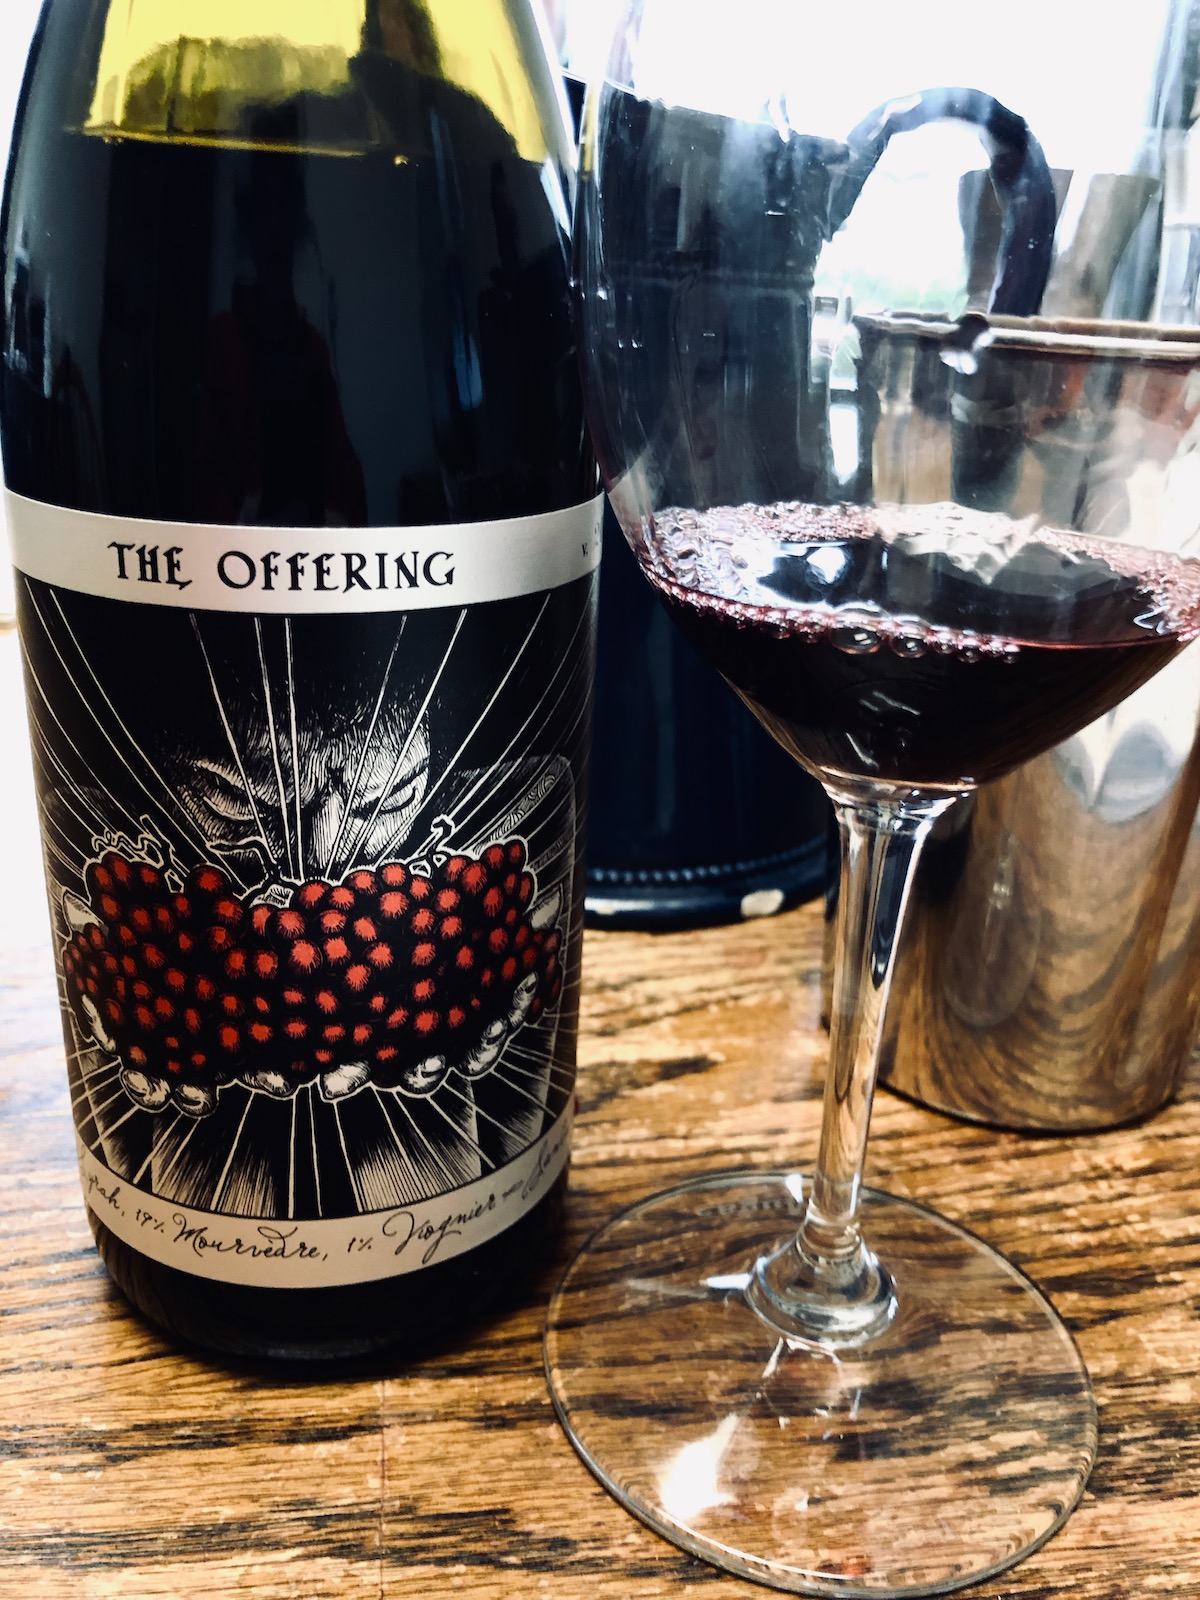 alt="Sans Liege 2018 The Offering bottle and glass"